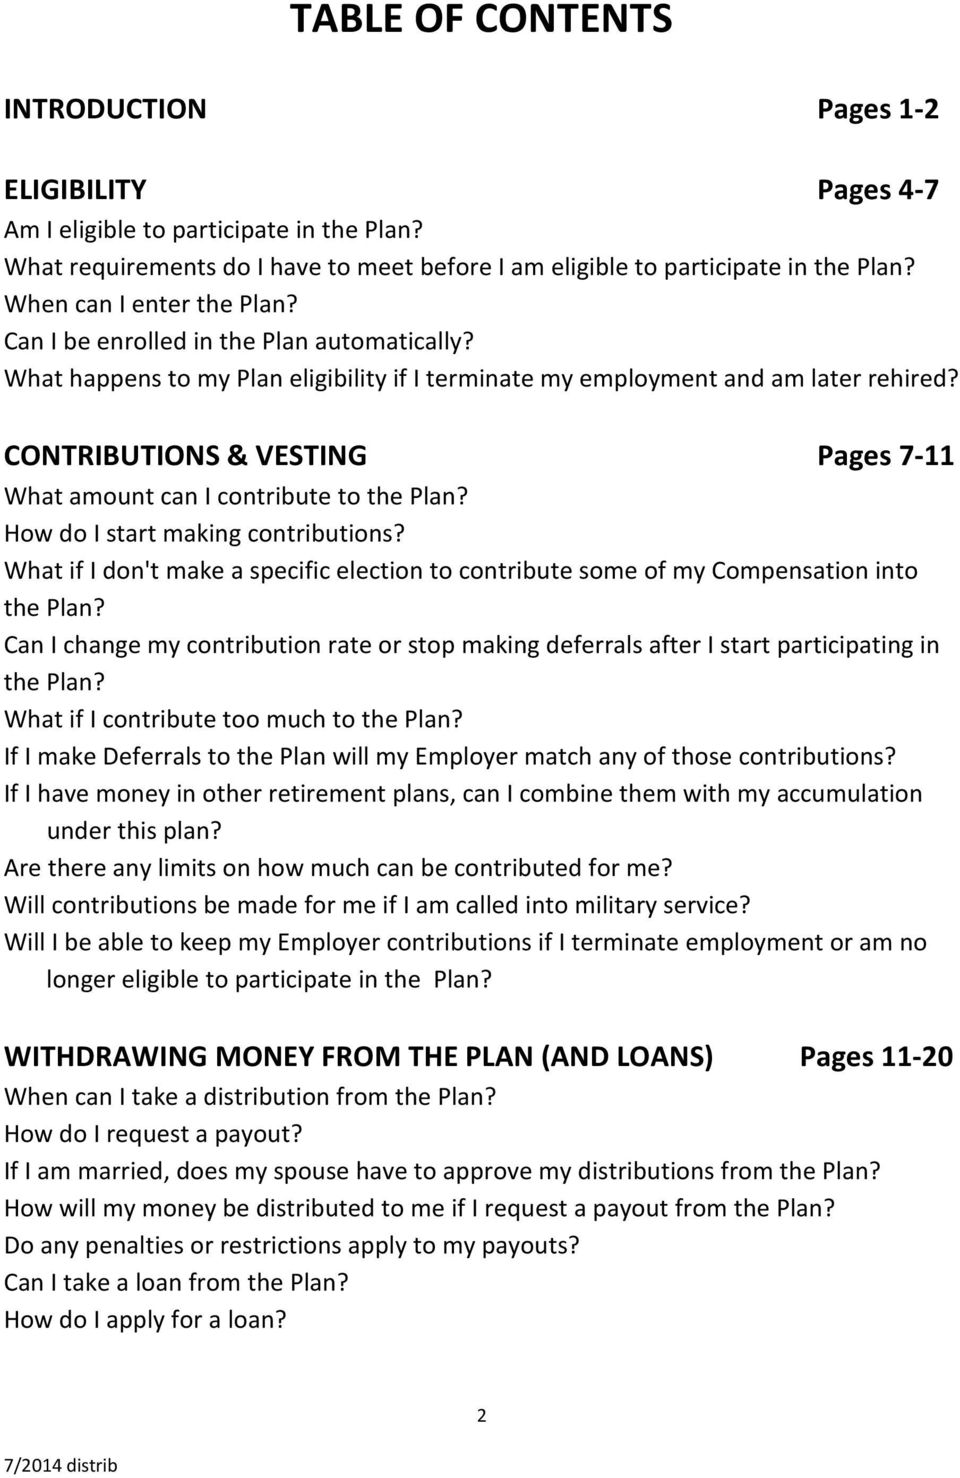 CONTRIBUTIONS & VESTING Pages 7-11 What amount can I contribute to the Plan? How do I start making contributions?